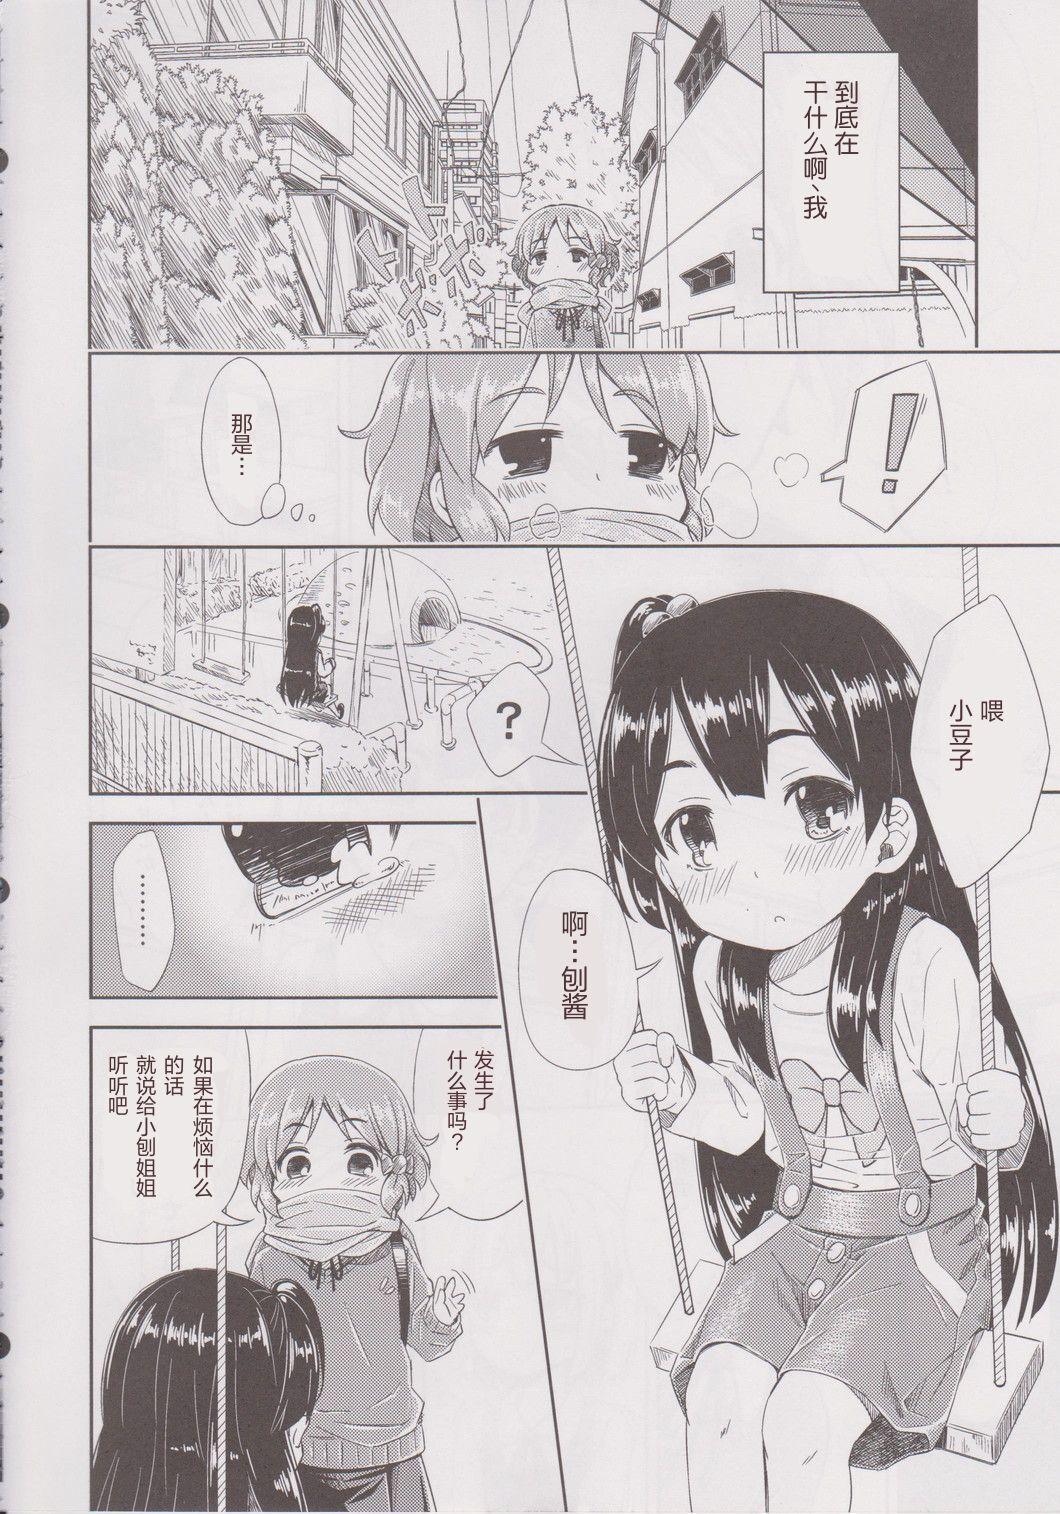 Asses Lovely Girls' Lily vol. 6 - Tamako market Relax - Page 5